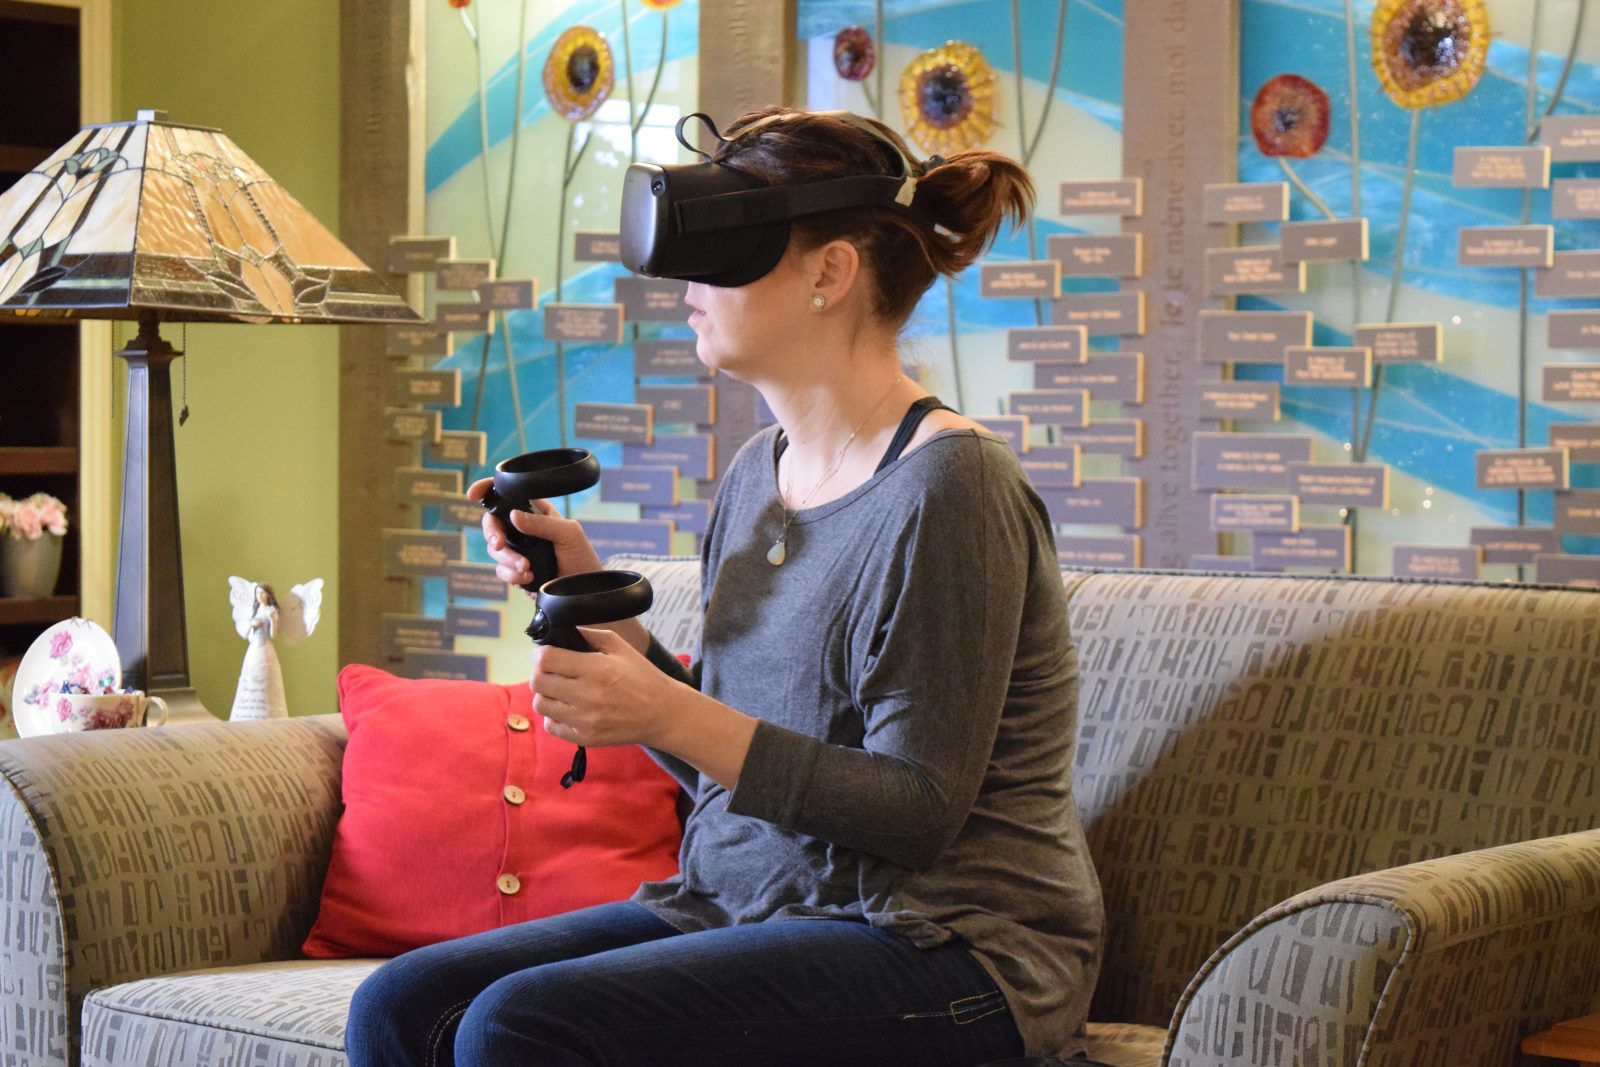 VR bringing comfort and connection to Hospice